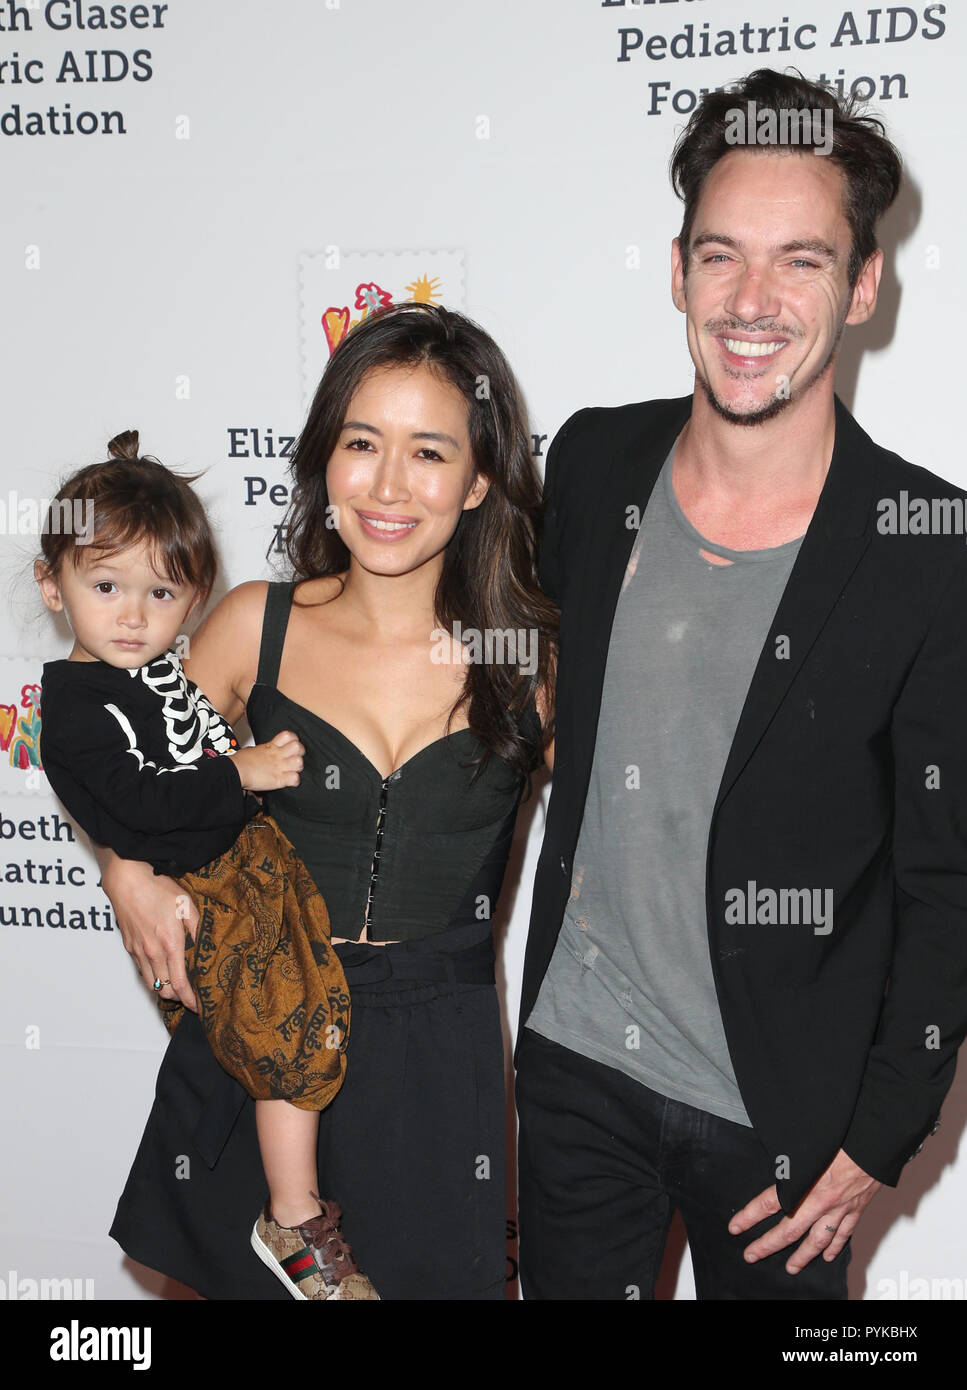 Culver City, Ca. 28th Oct, 2018. Jonathan Rhys Meyers, Mara Lane, Toco Lane  Rhys Meyers, at the Elizabeth Glaser Pediatric AIDS Foundation 30th  Anniversary at A Time for Heroes Family Festival at